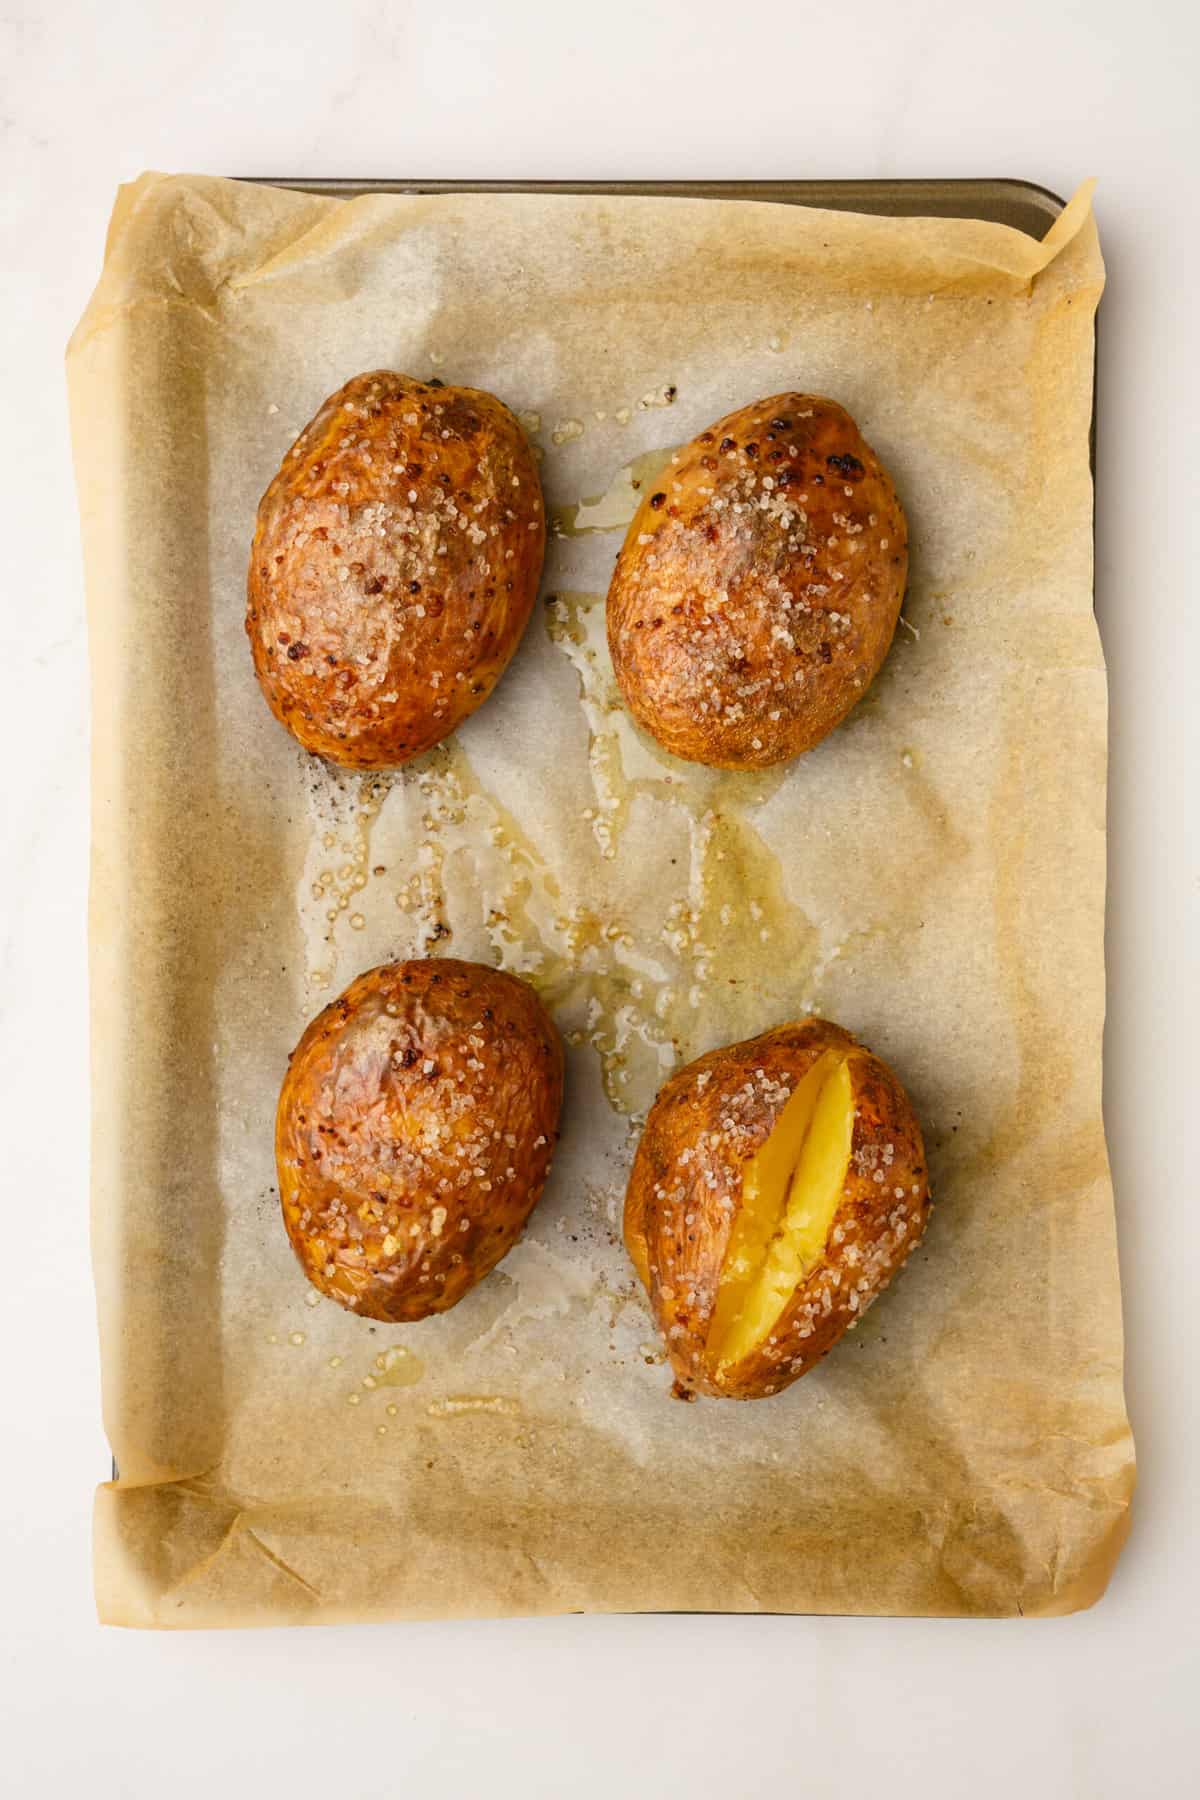 four baked russet potatoes sitting on a parchment lined baking sheet